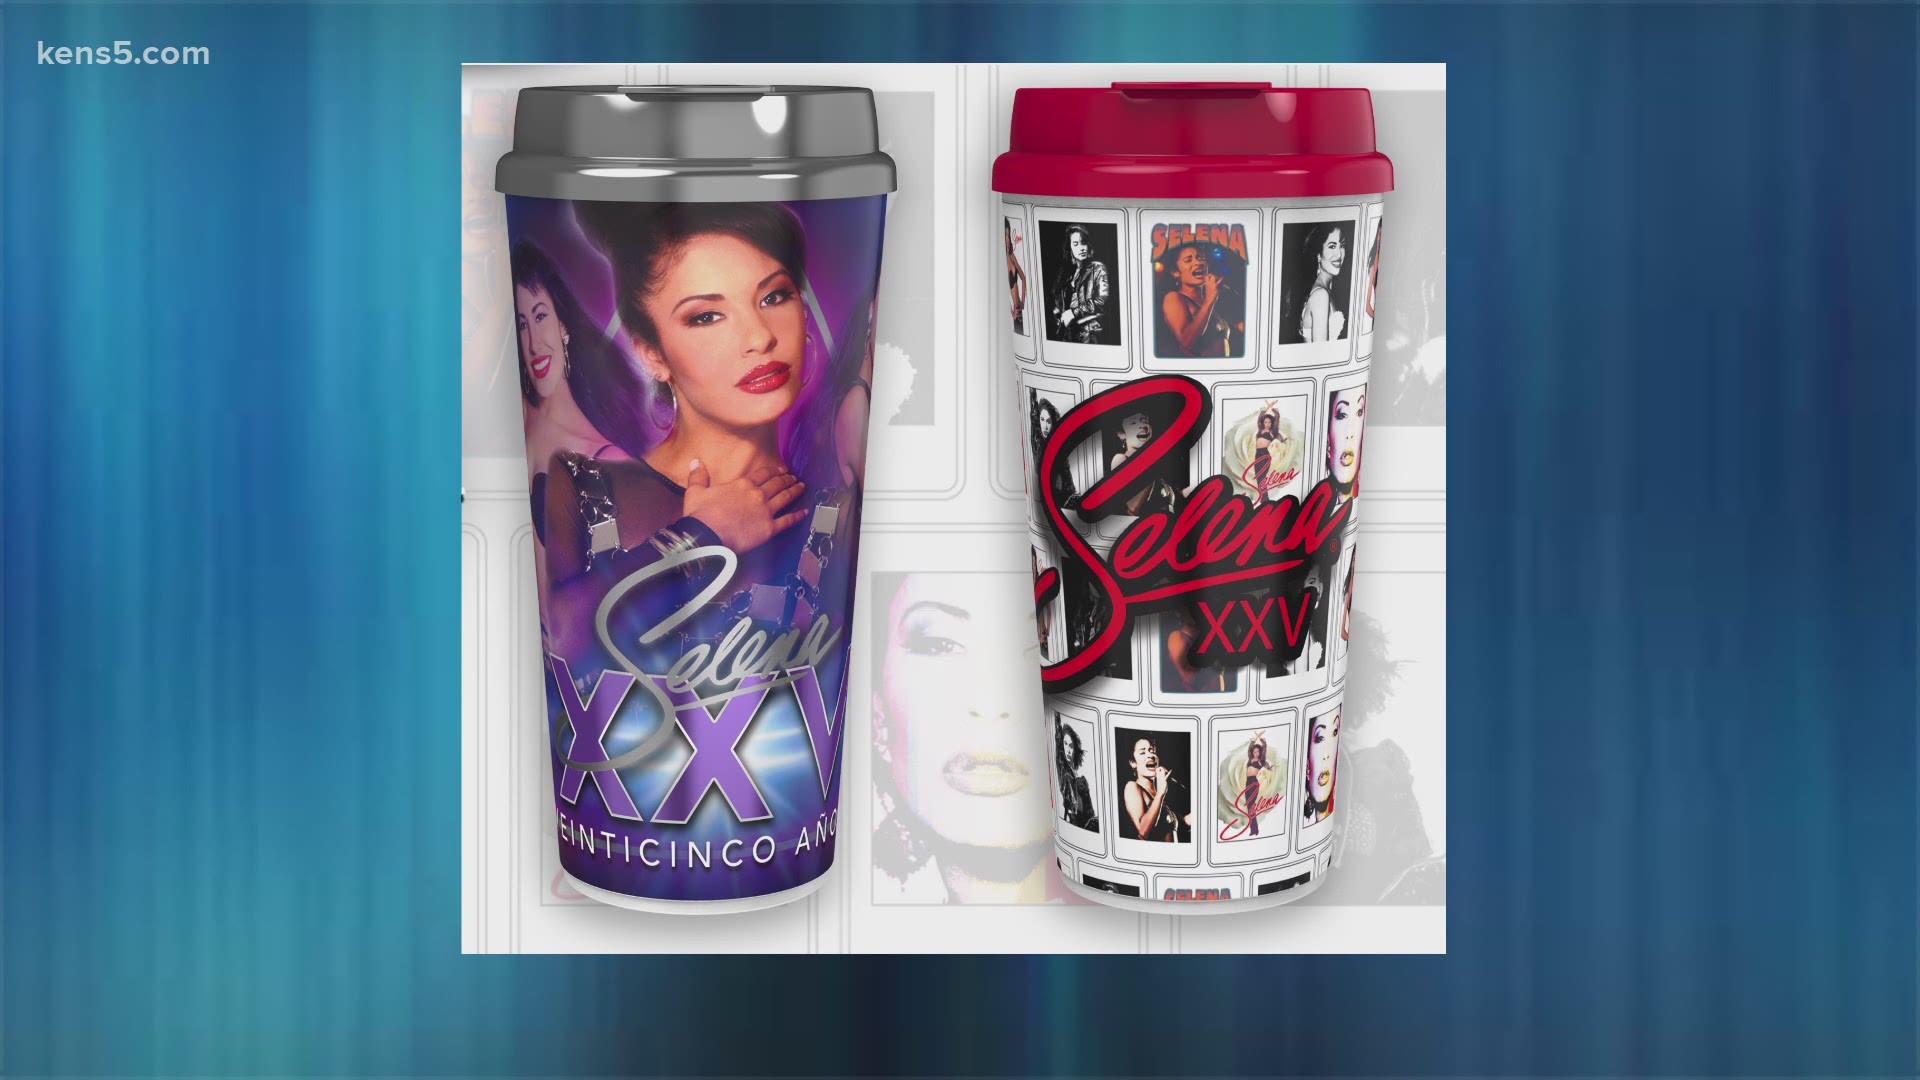 Selena fans will be able to purchase the final two cup designs, limit six per person, at participating Stripes stores.